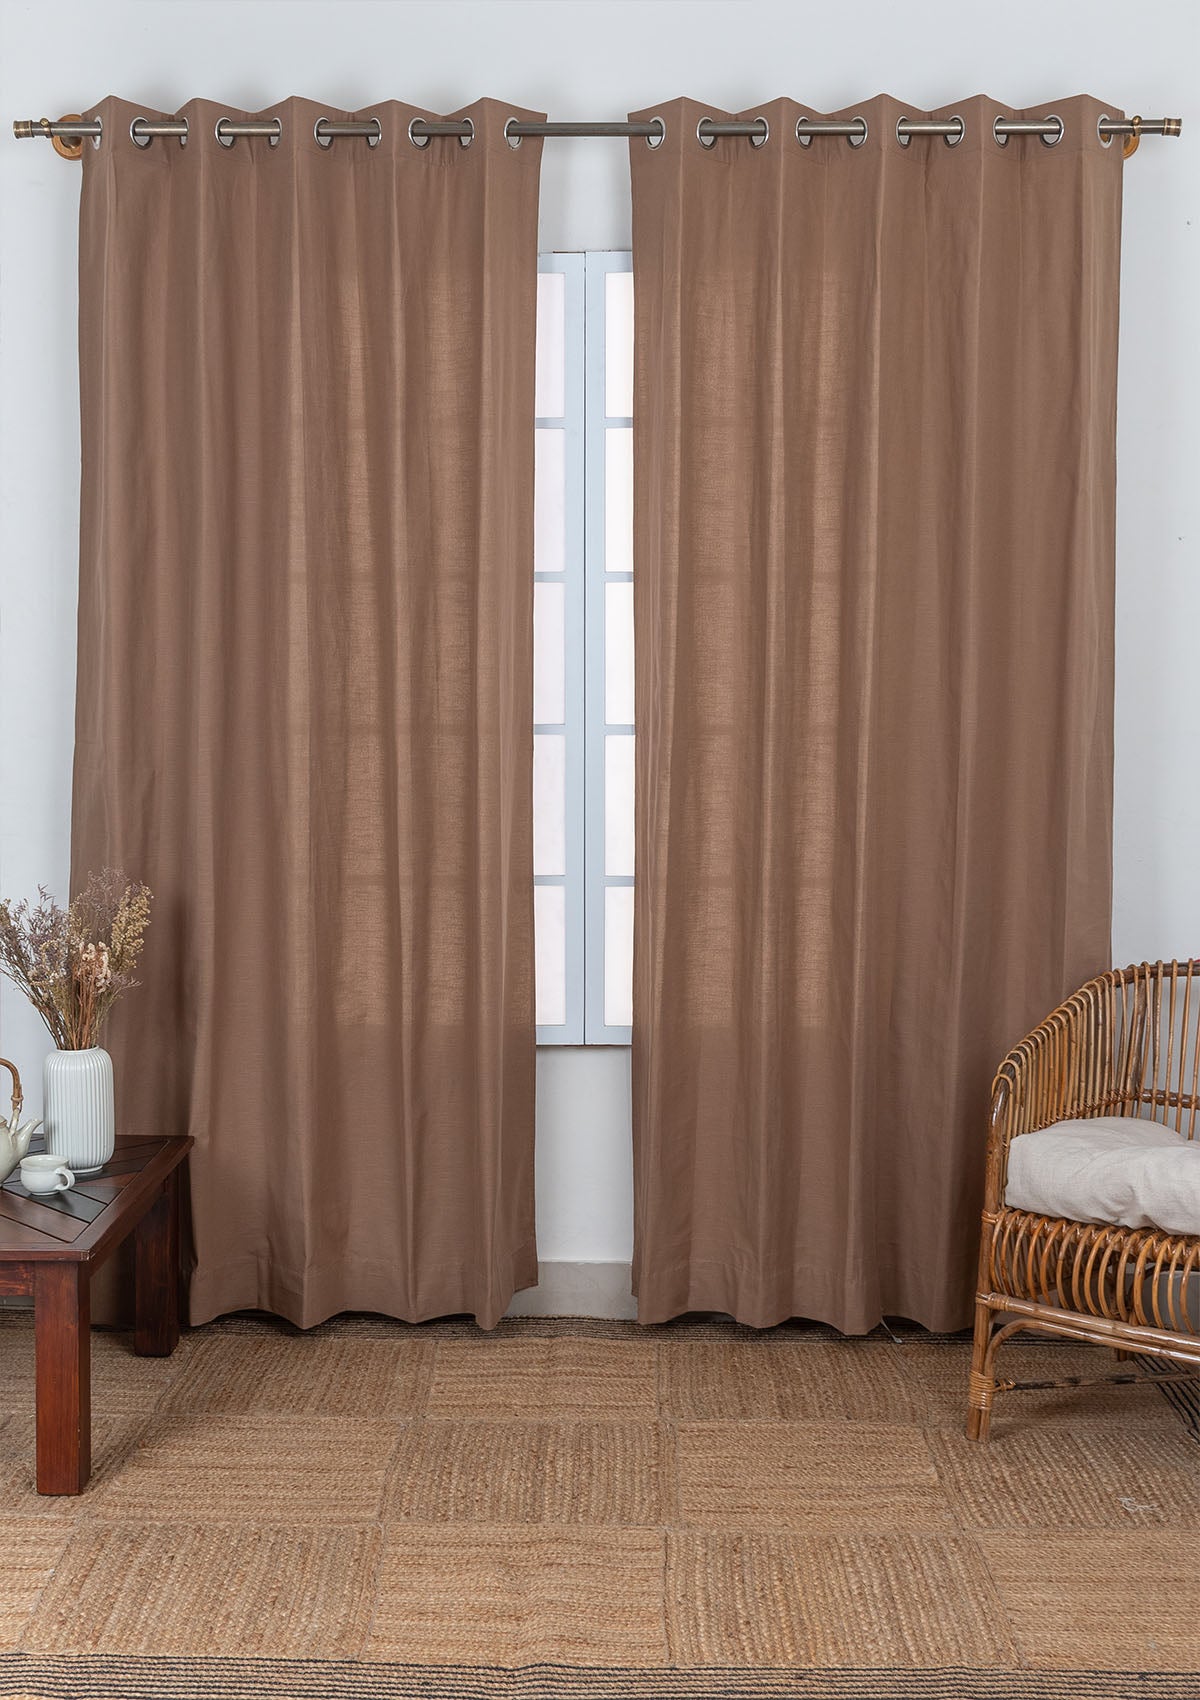 Solid chocolate brown 100% cotton plain curtain for bedroom - Room darkening - Single